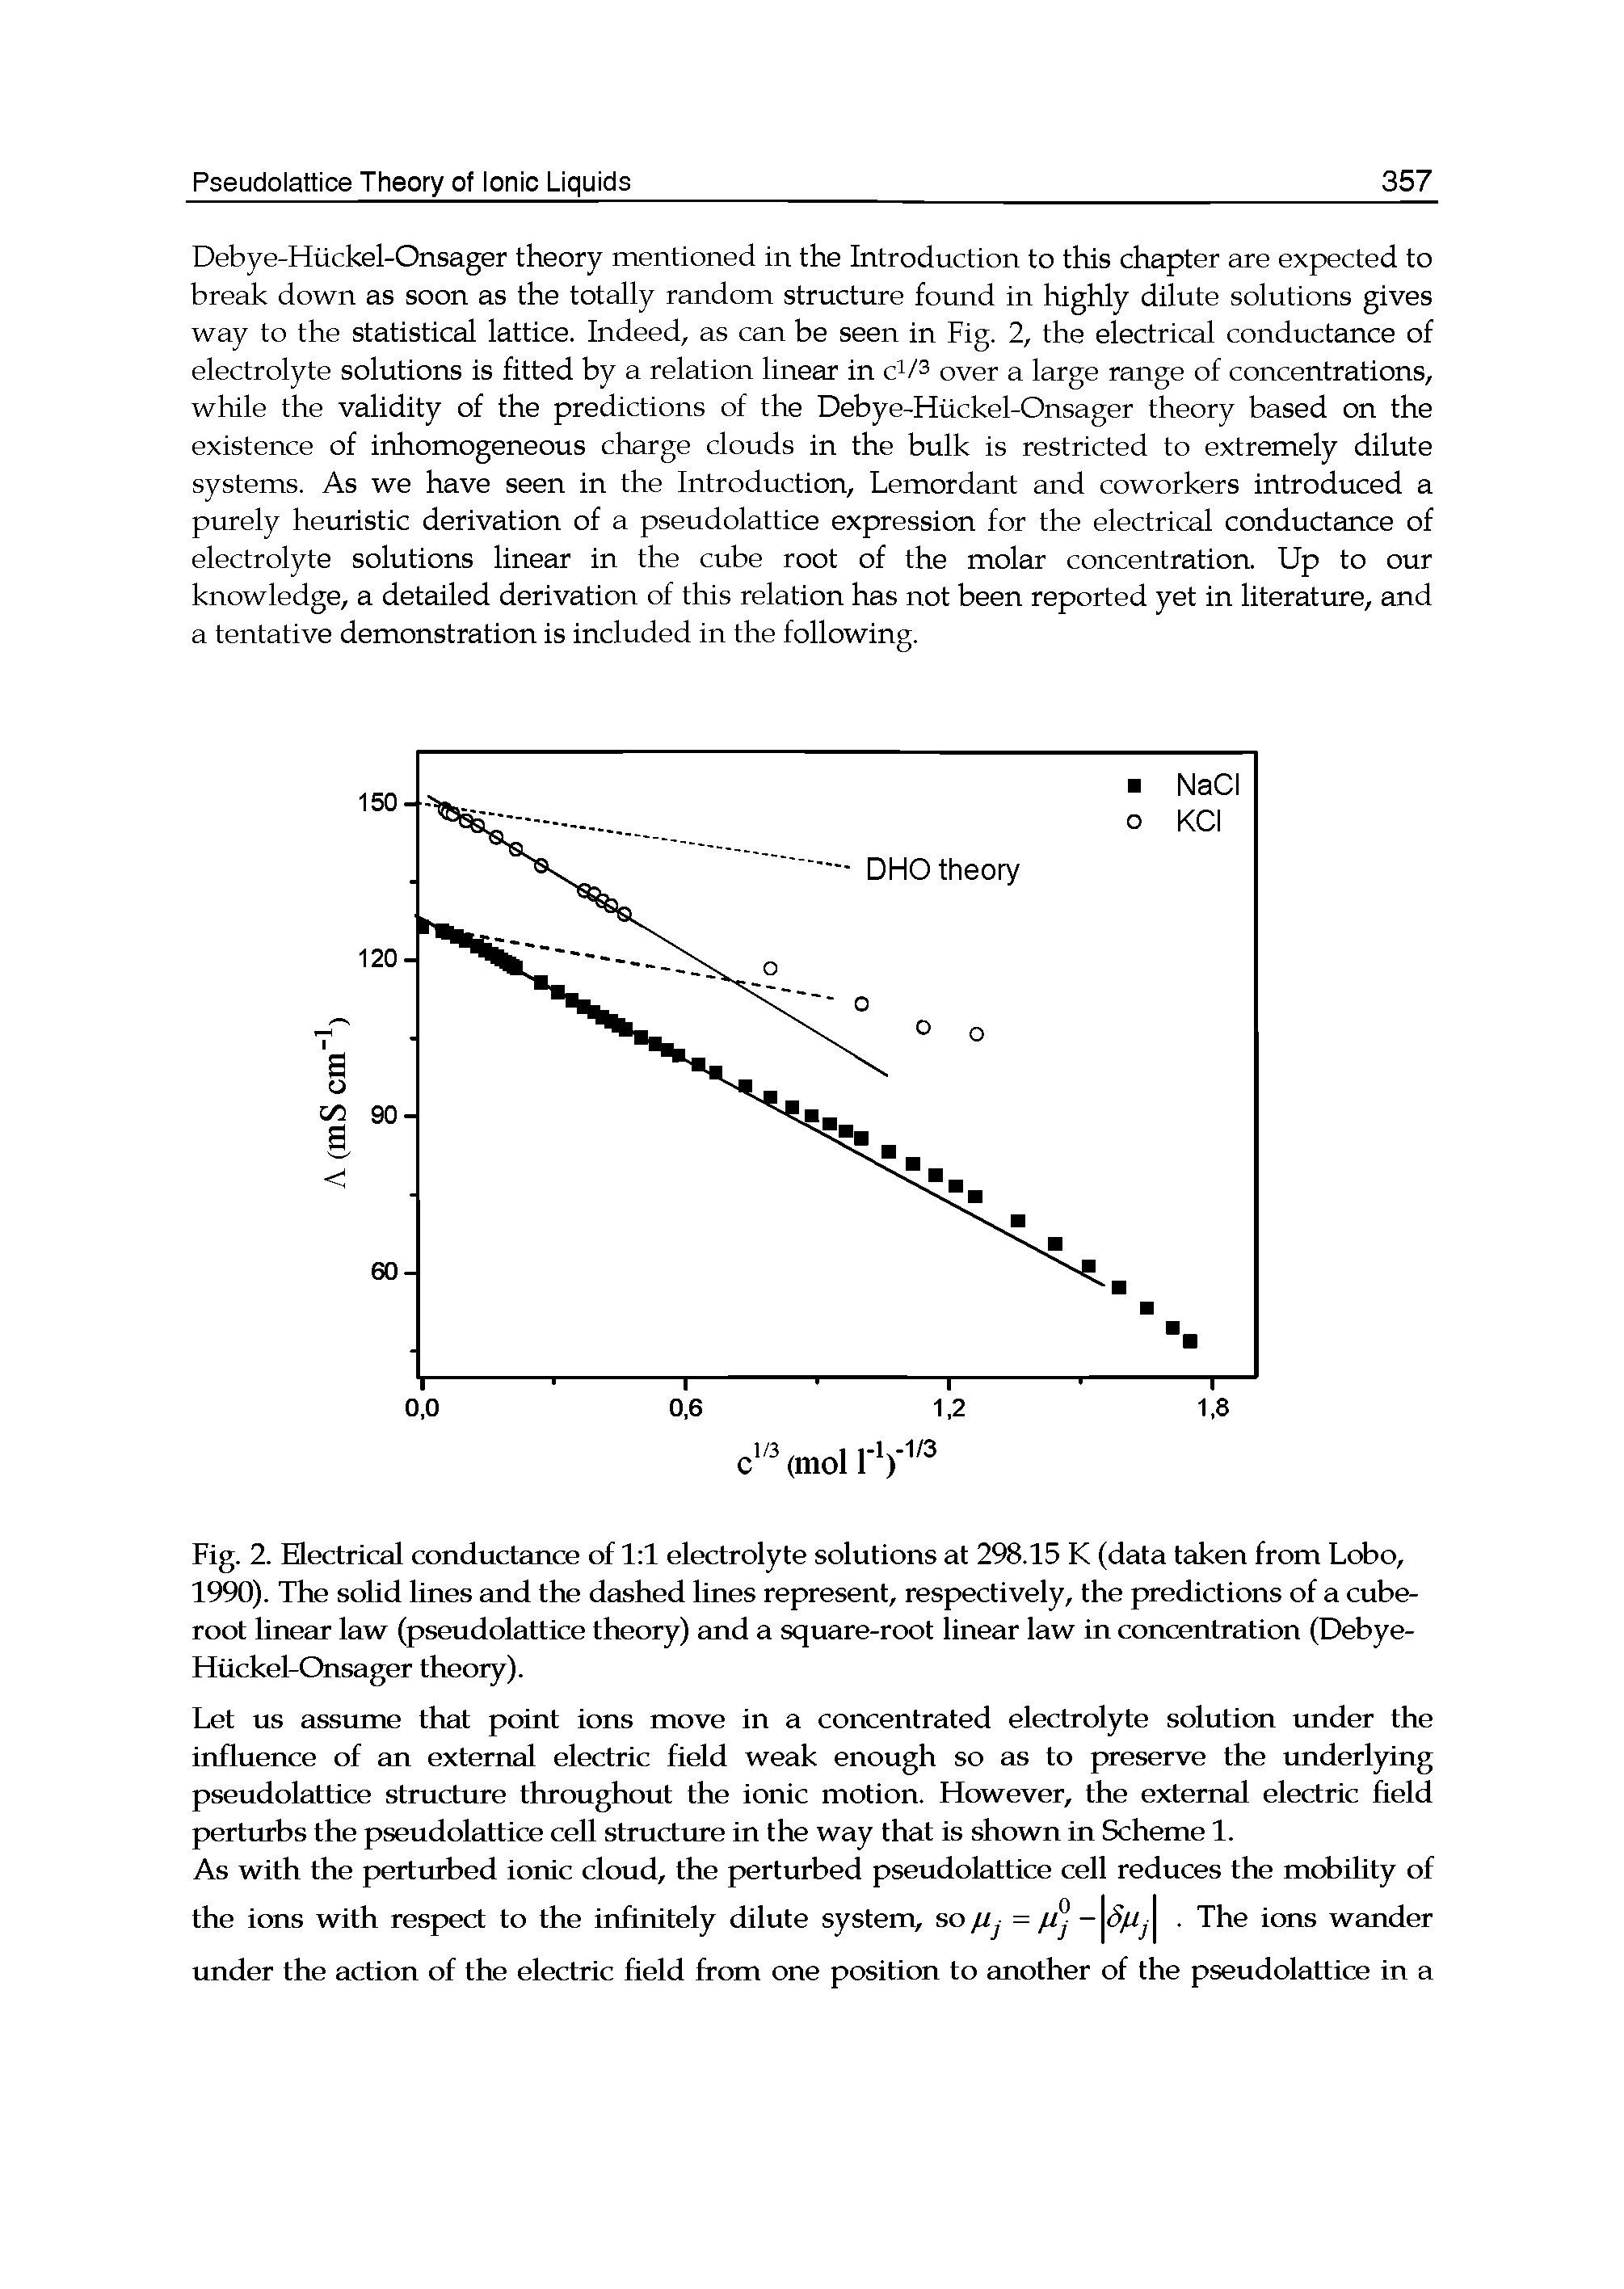 Fig. 2. Electrical conductance of 1 1 electrolyte solutions at 298.15 K (data taken from Lobo, 1990). The solid lines and the dashed lines represent, respectively, the predictions of a cube-root linear law (pseudolattice theory) and a square-root linear law in concentration (Debye-Hiickel-Onsager theory).